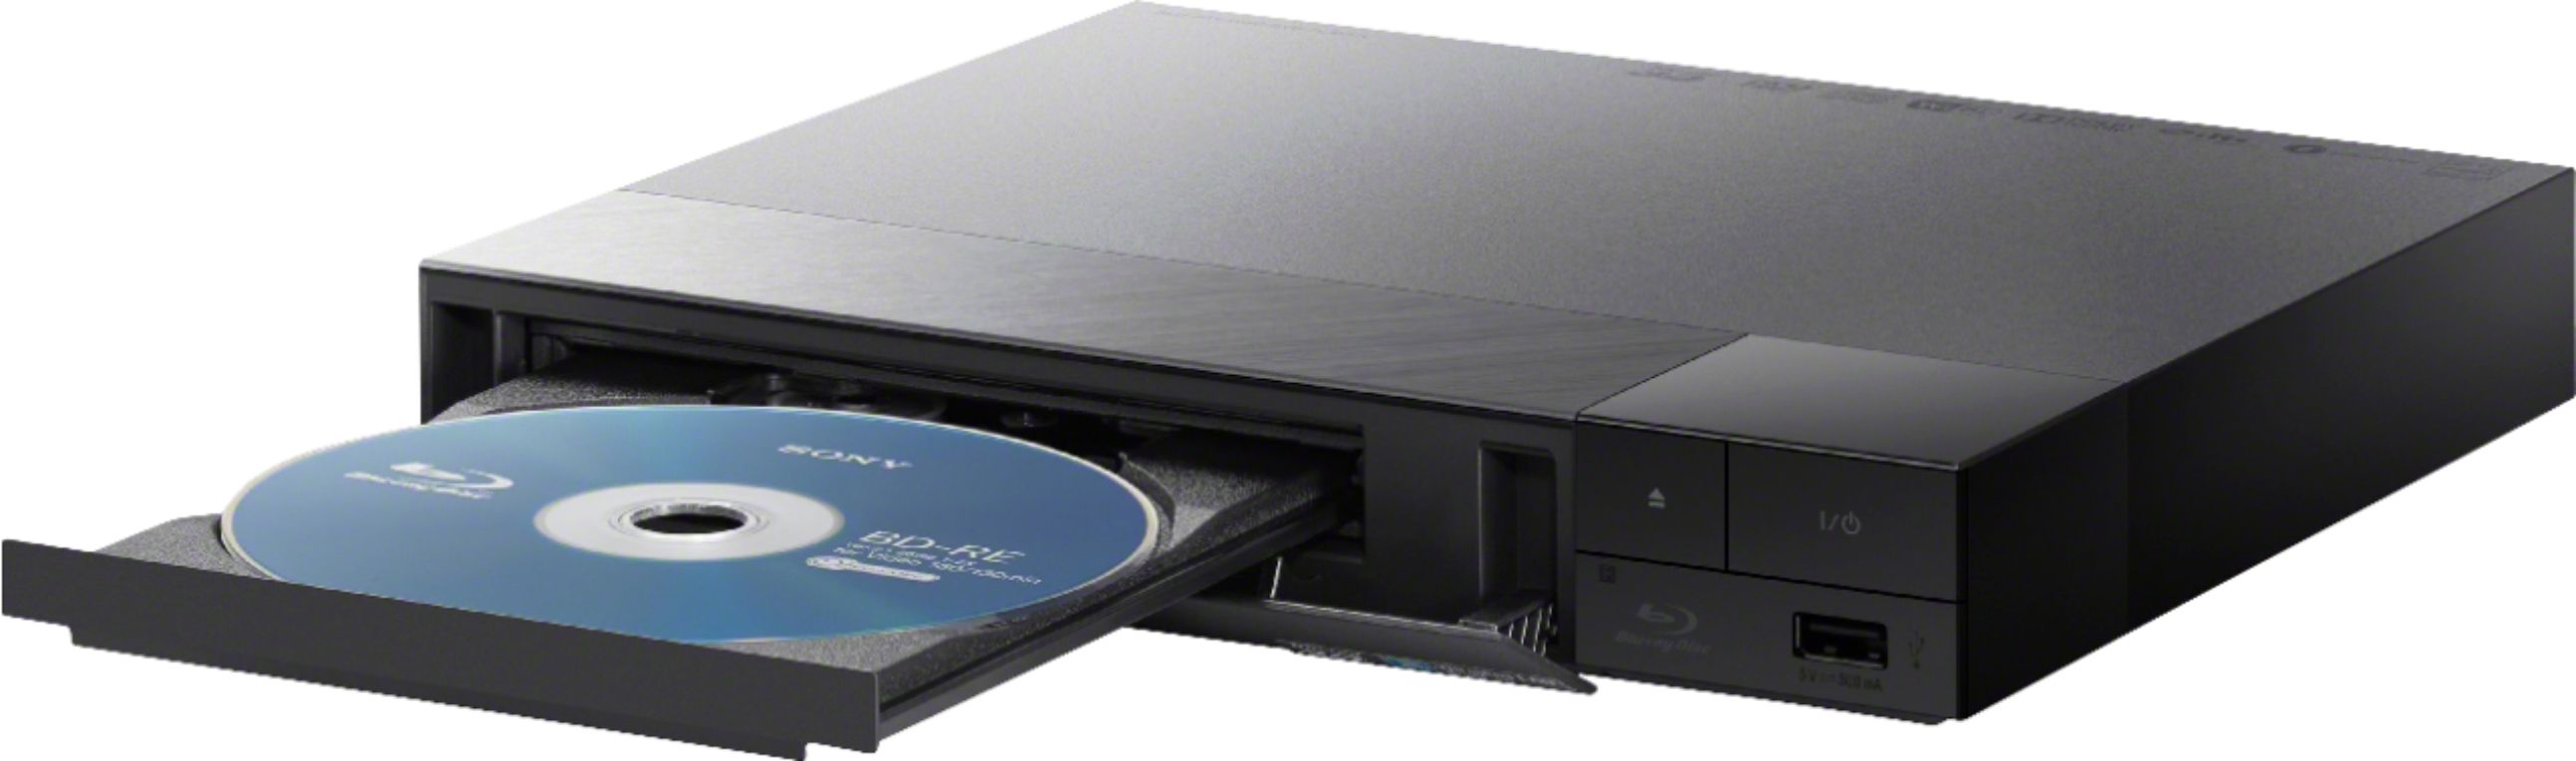 Angle View: Sony - Streaming Blu-ray Disc player with Built-In Wi-Fi and HDMI cable - Black